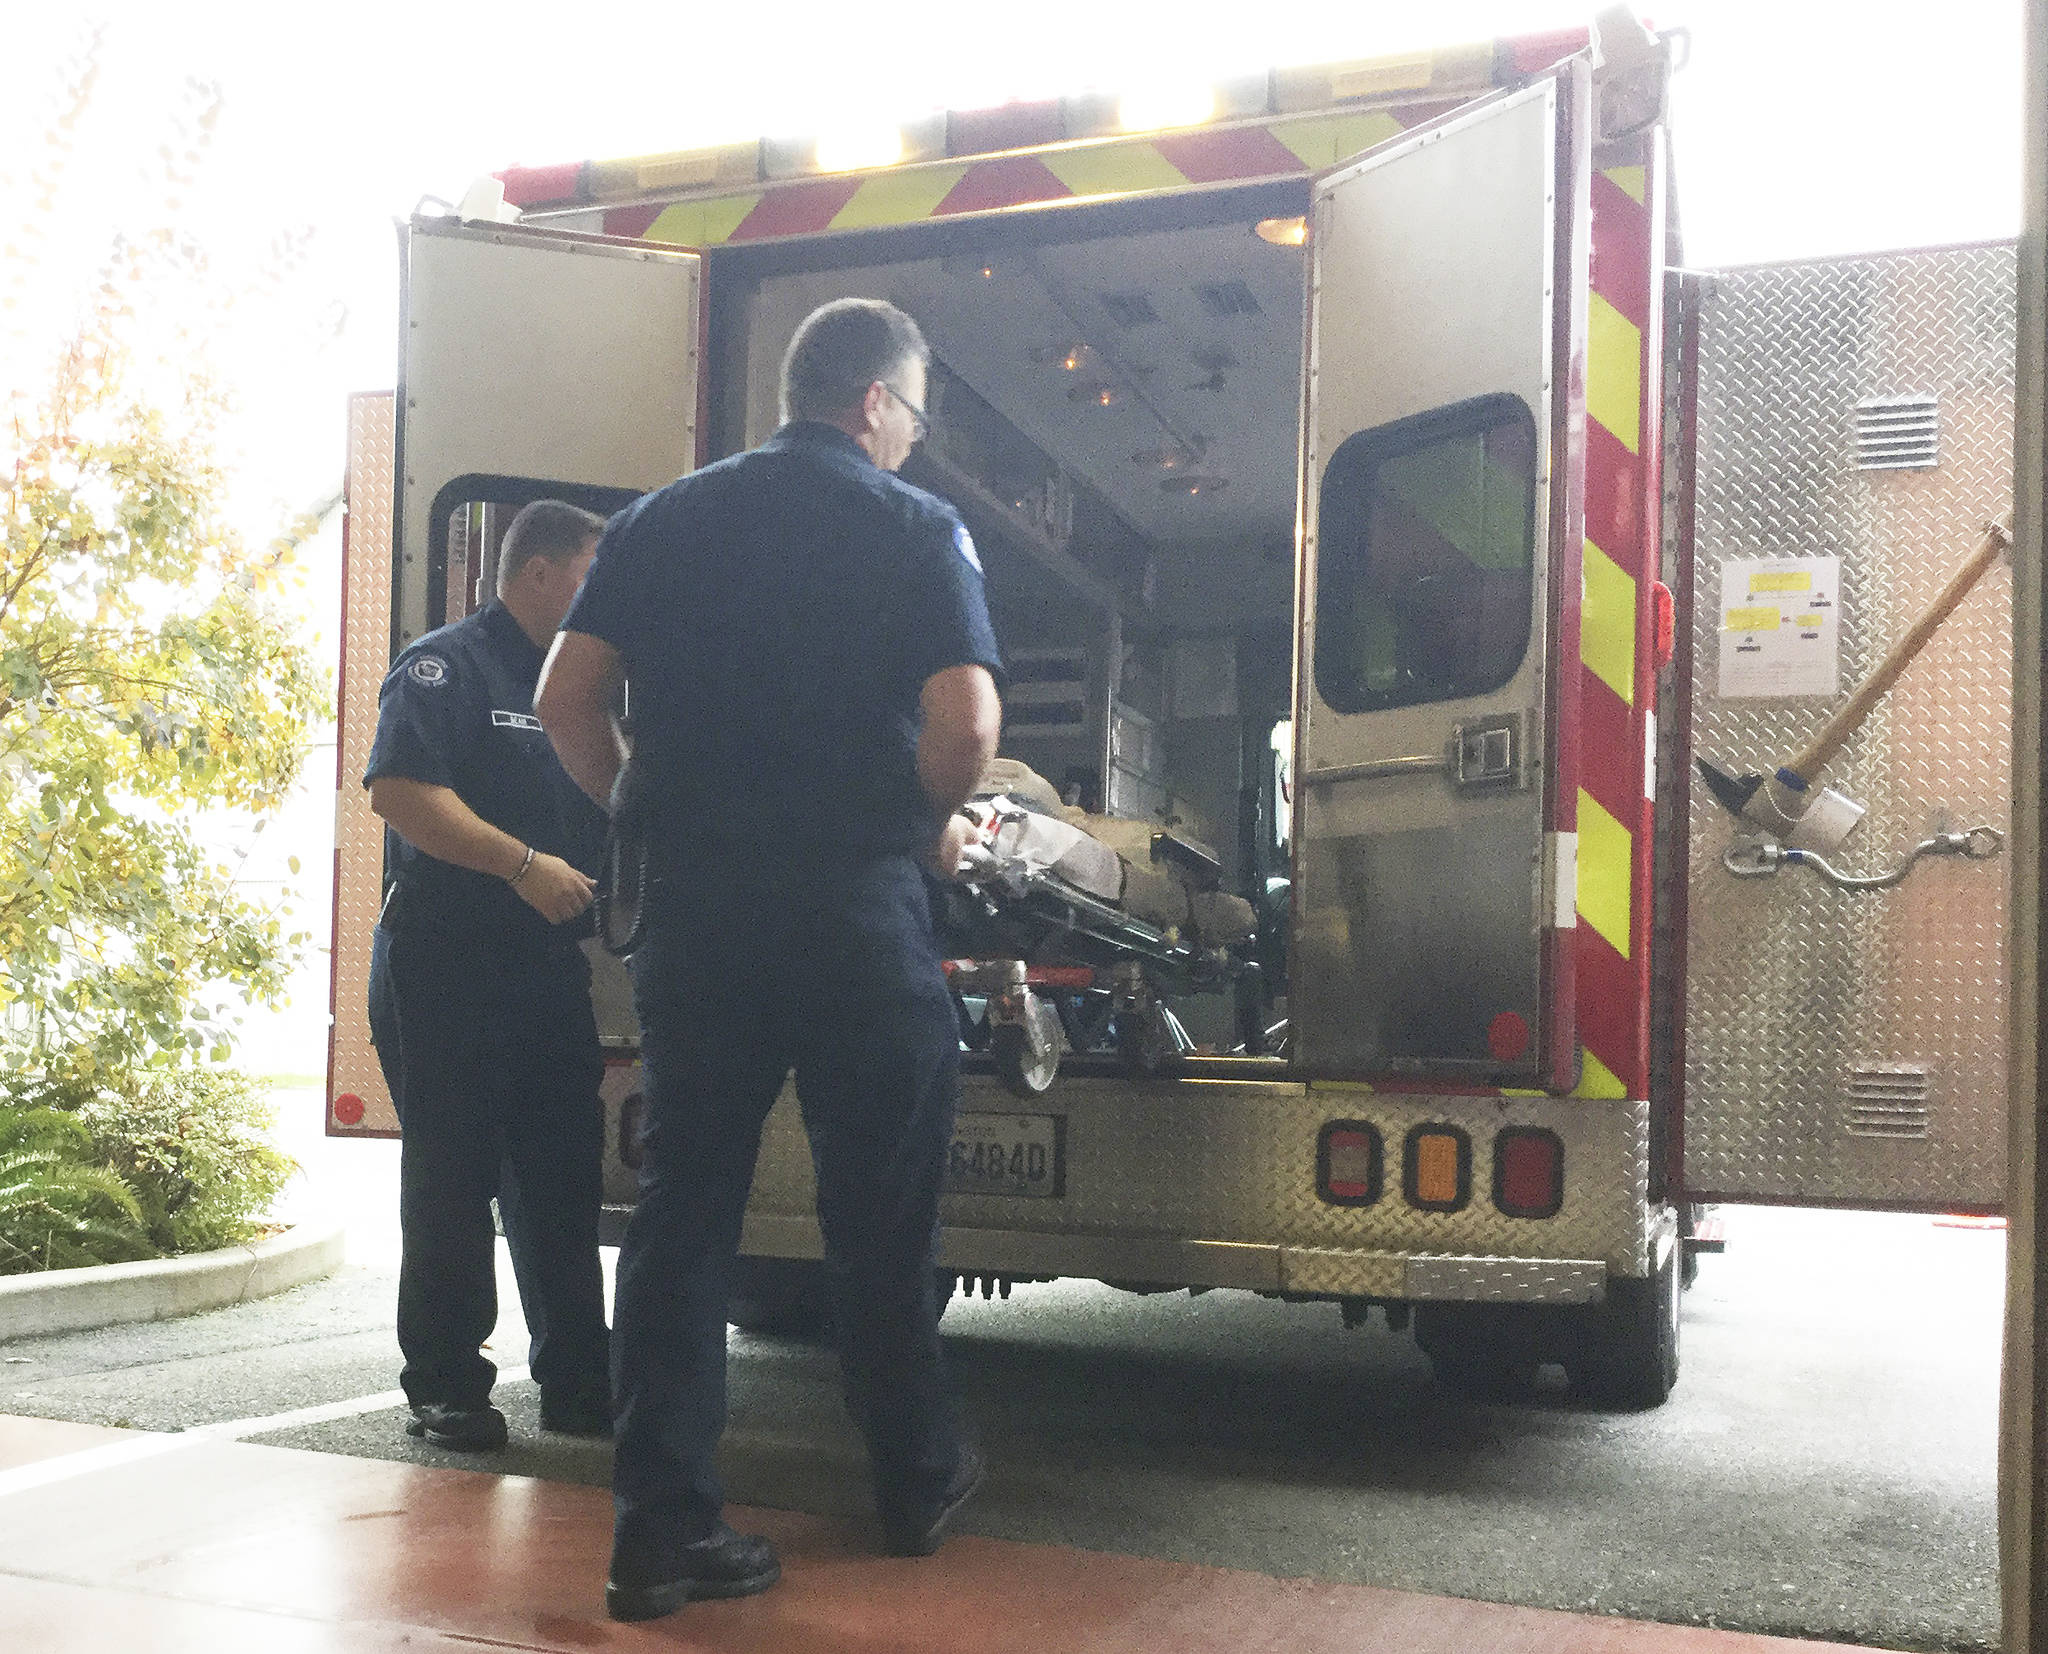 City Council approves ambulance utility fee to curb mountain EMS costs, dedicate more funds to public safety needs - Updated